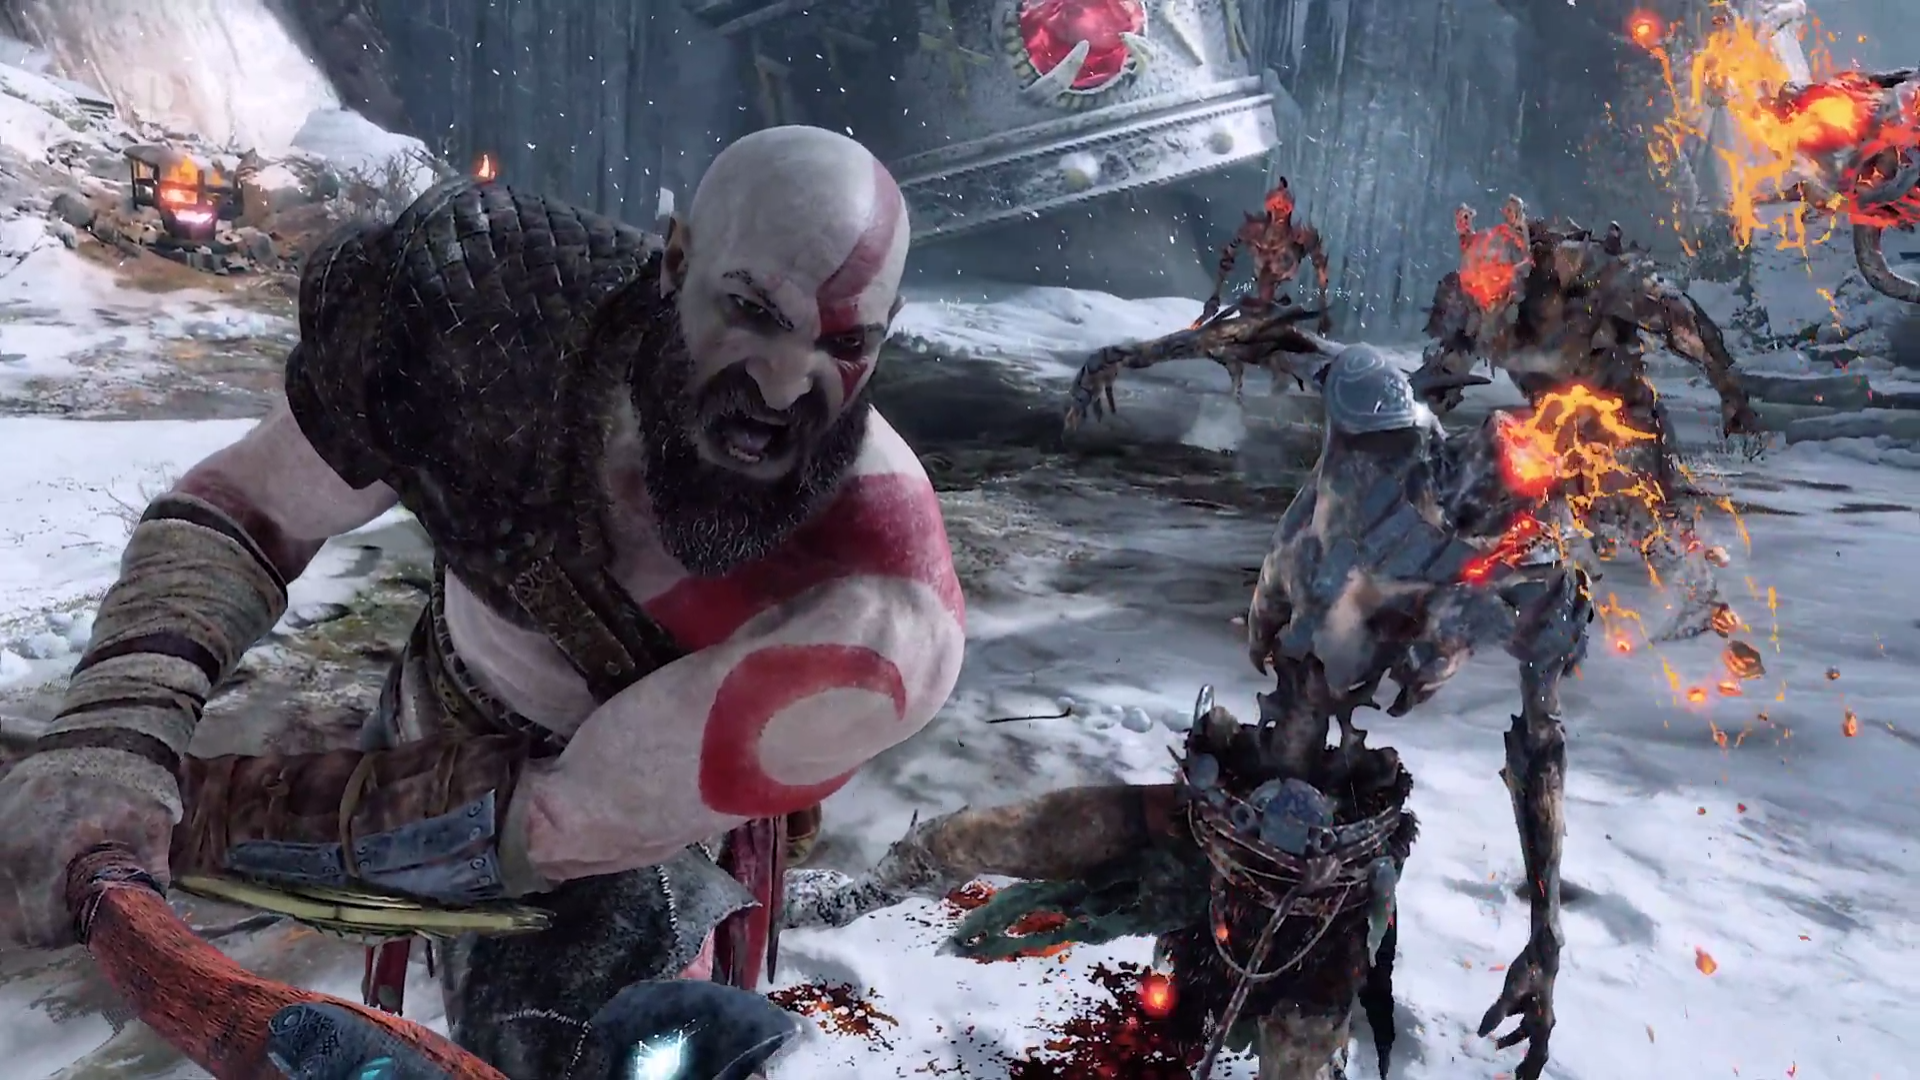 God of War PS4 combat: Kratos in combat with a flaming enemy